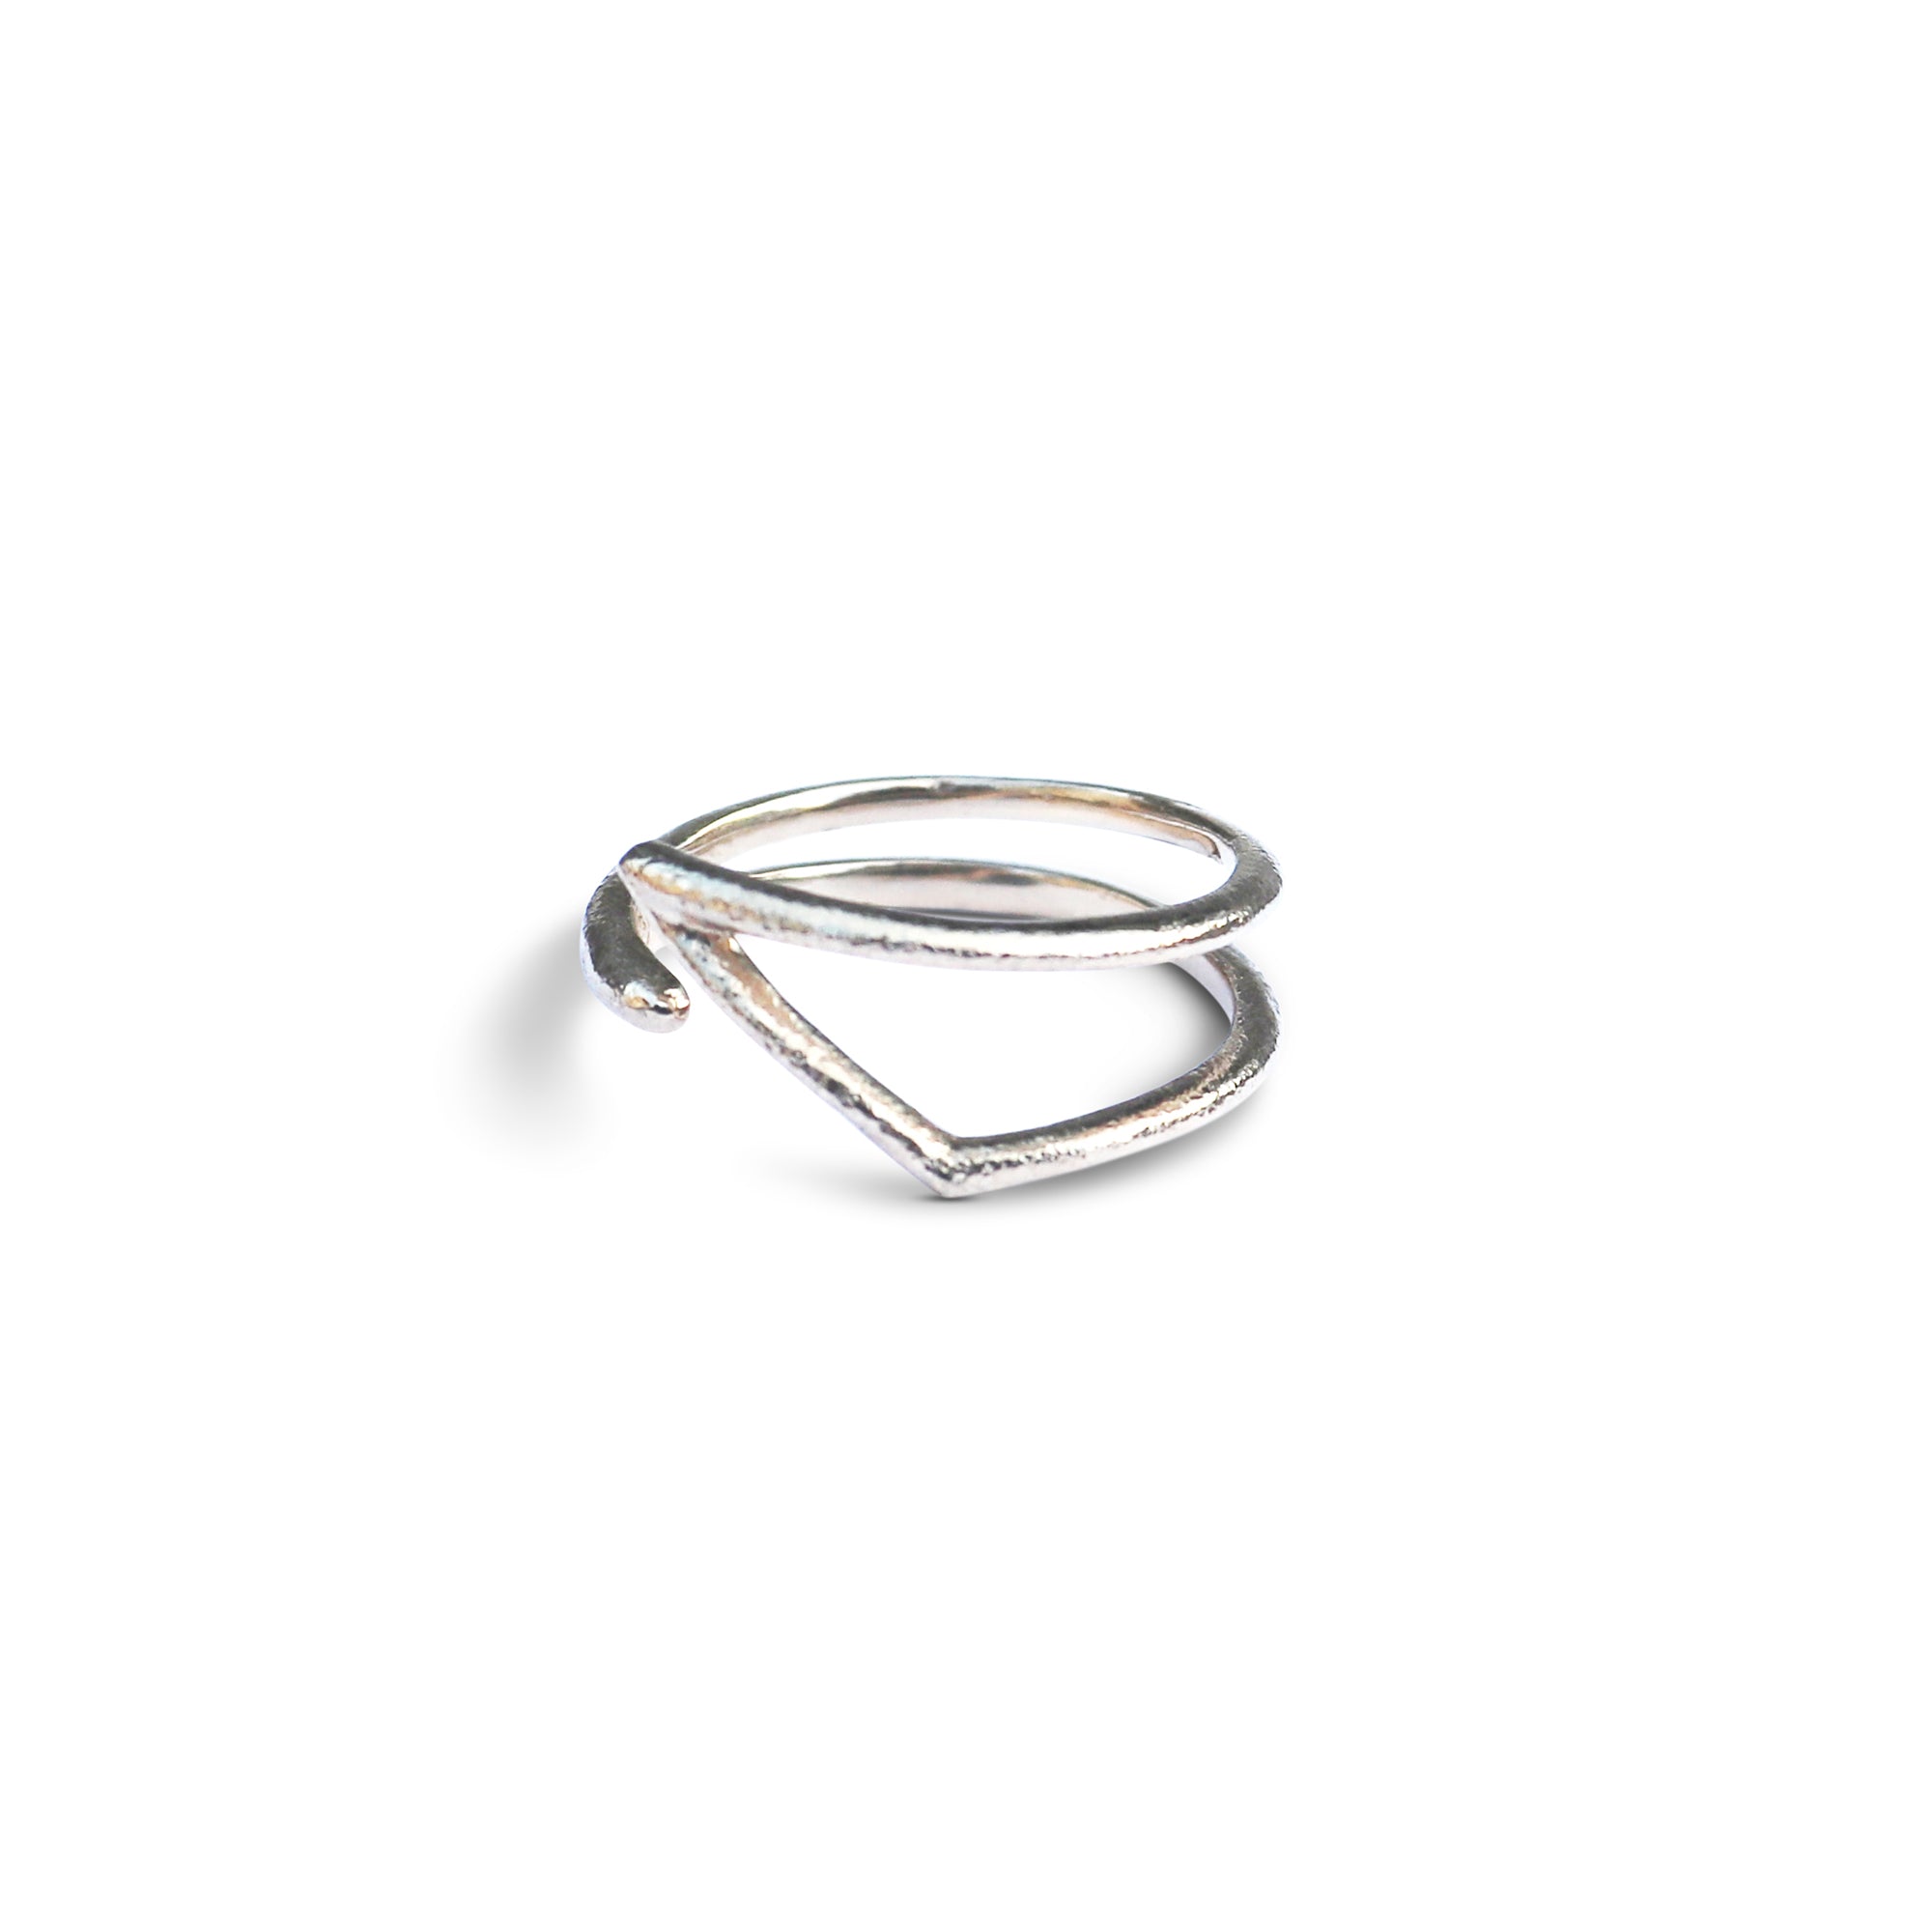 Aimée Kennedy - Wedge Ring - Silver Adjustable